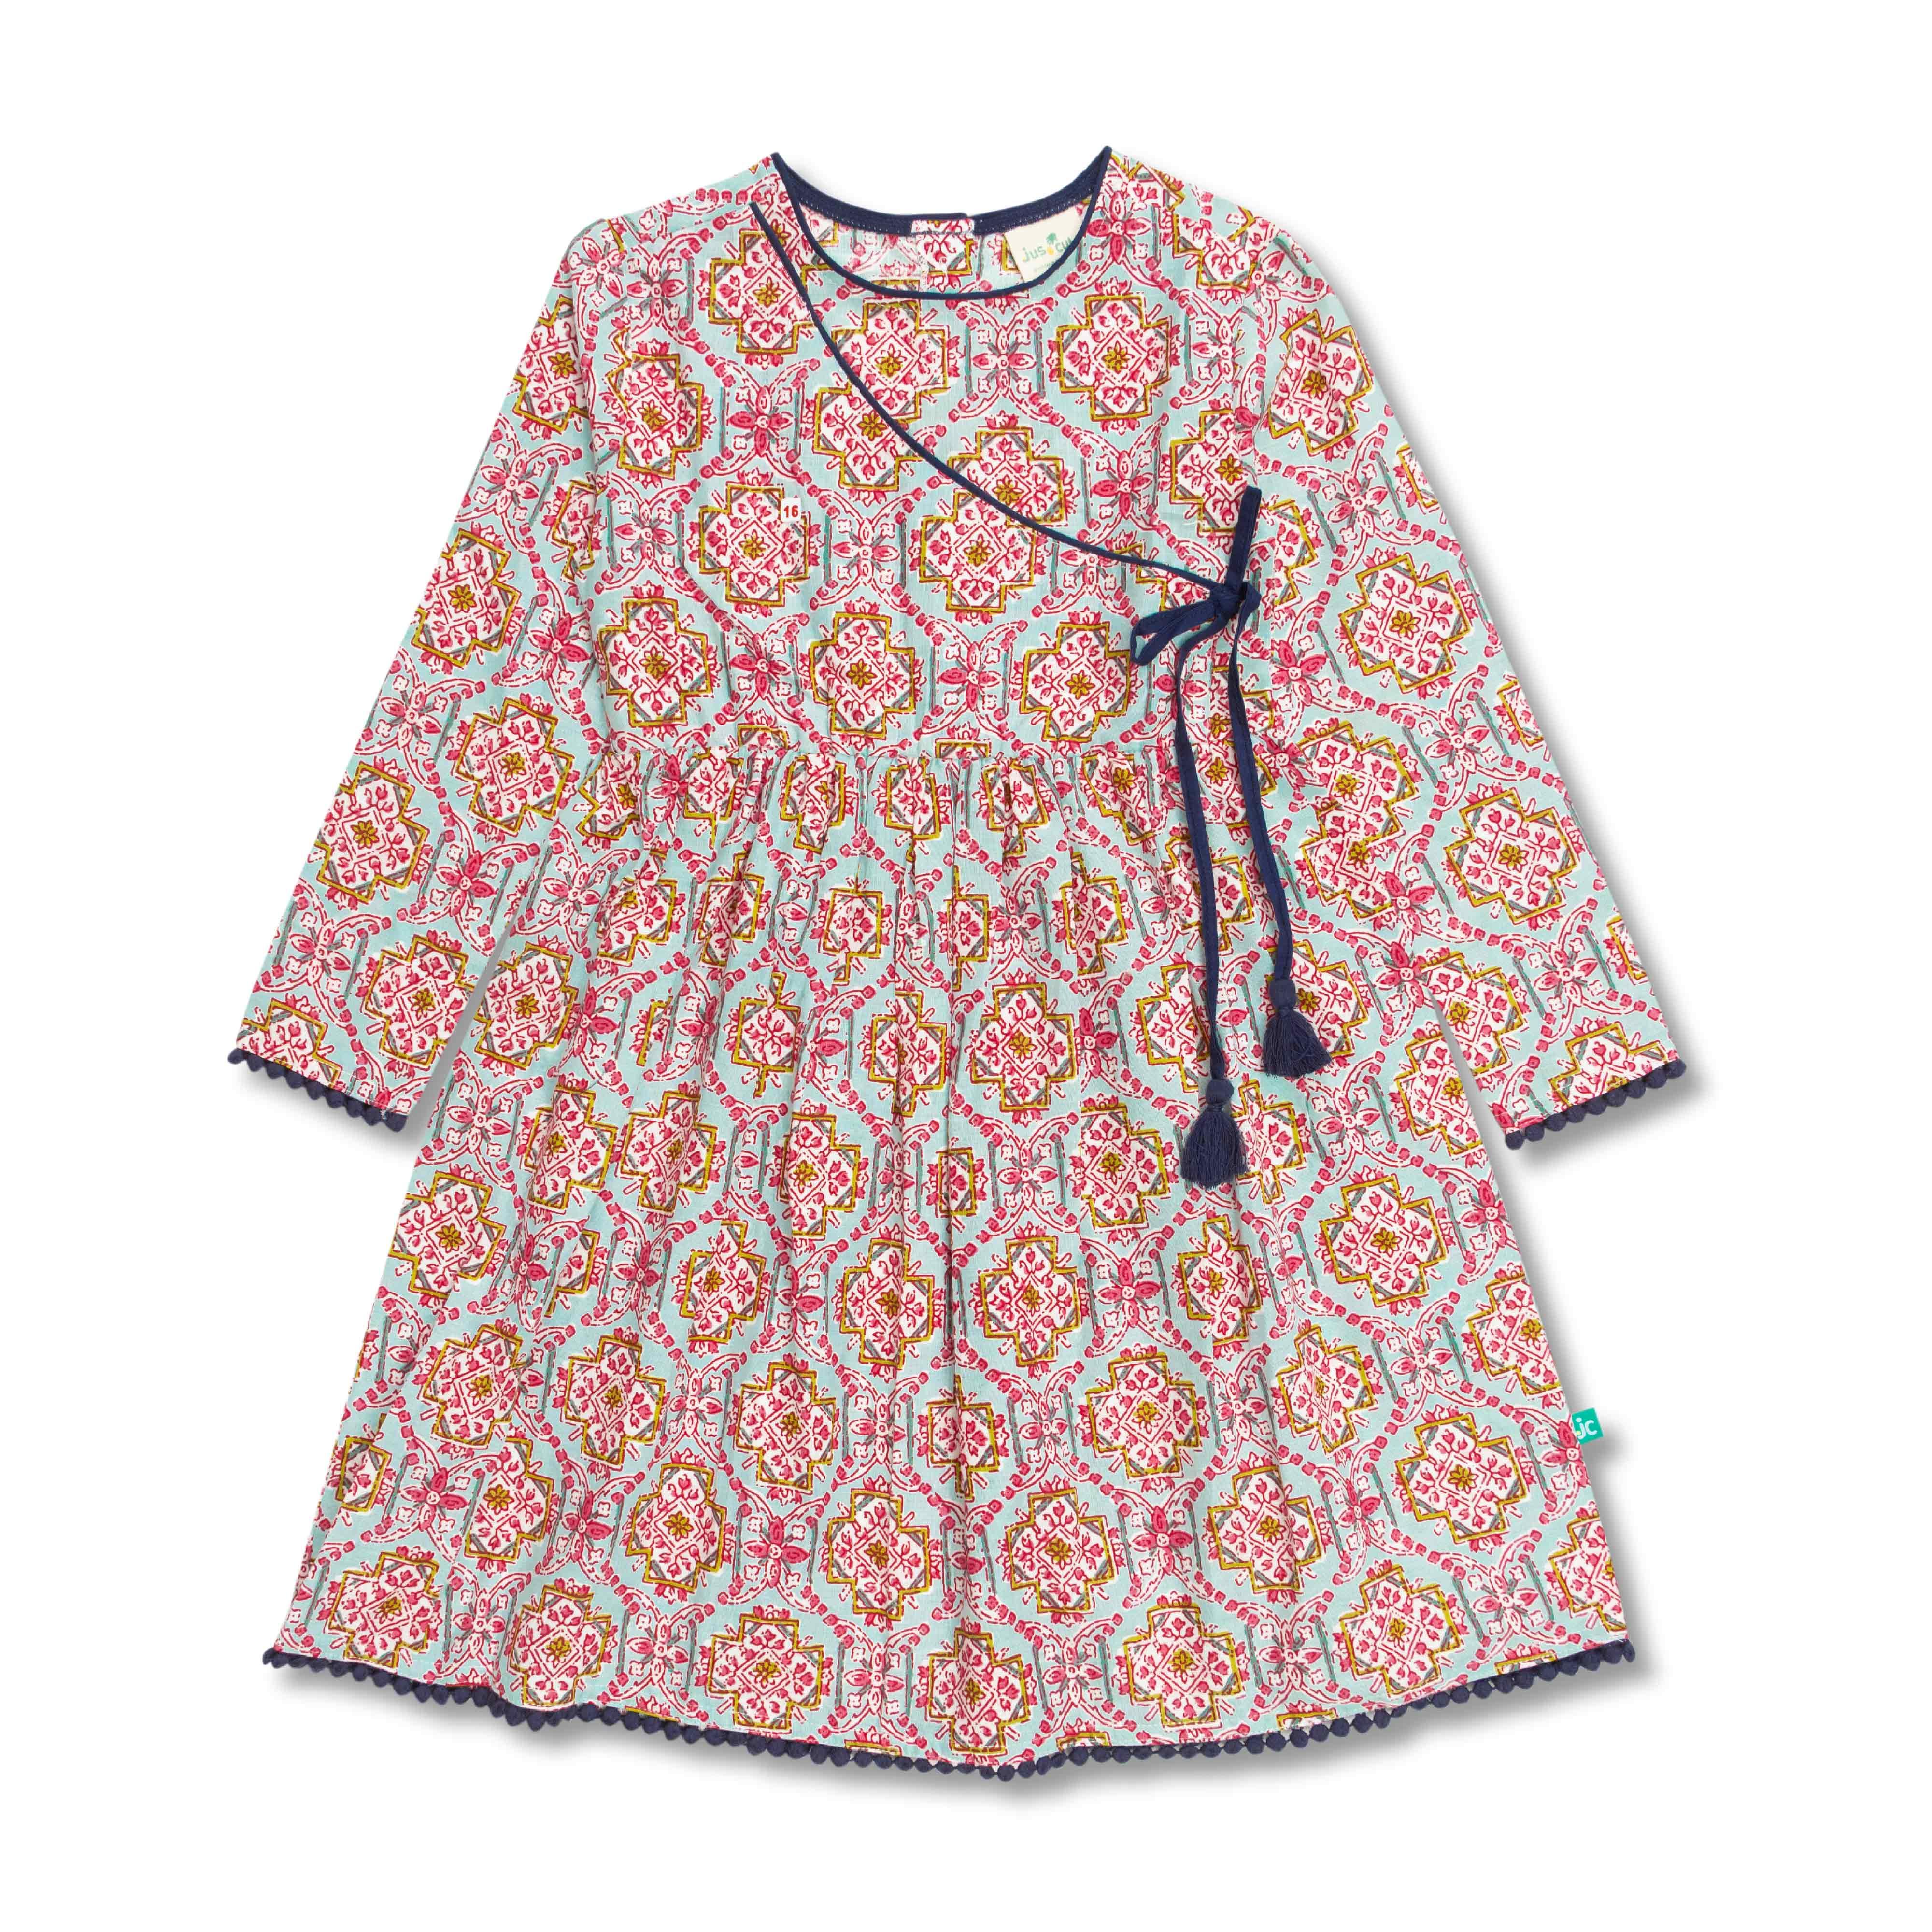 Young Girls All Over Printed Full Sleeve Dress